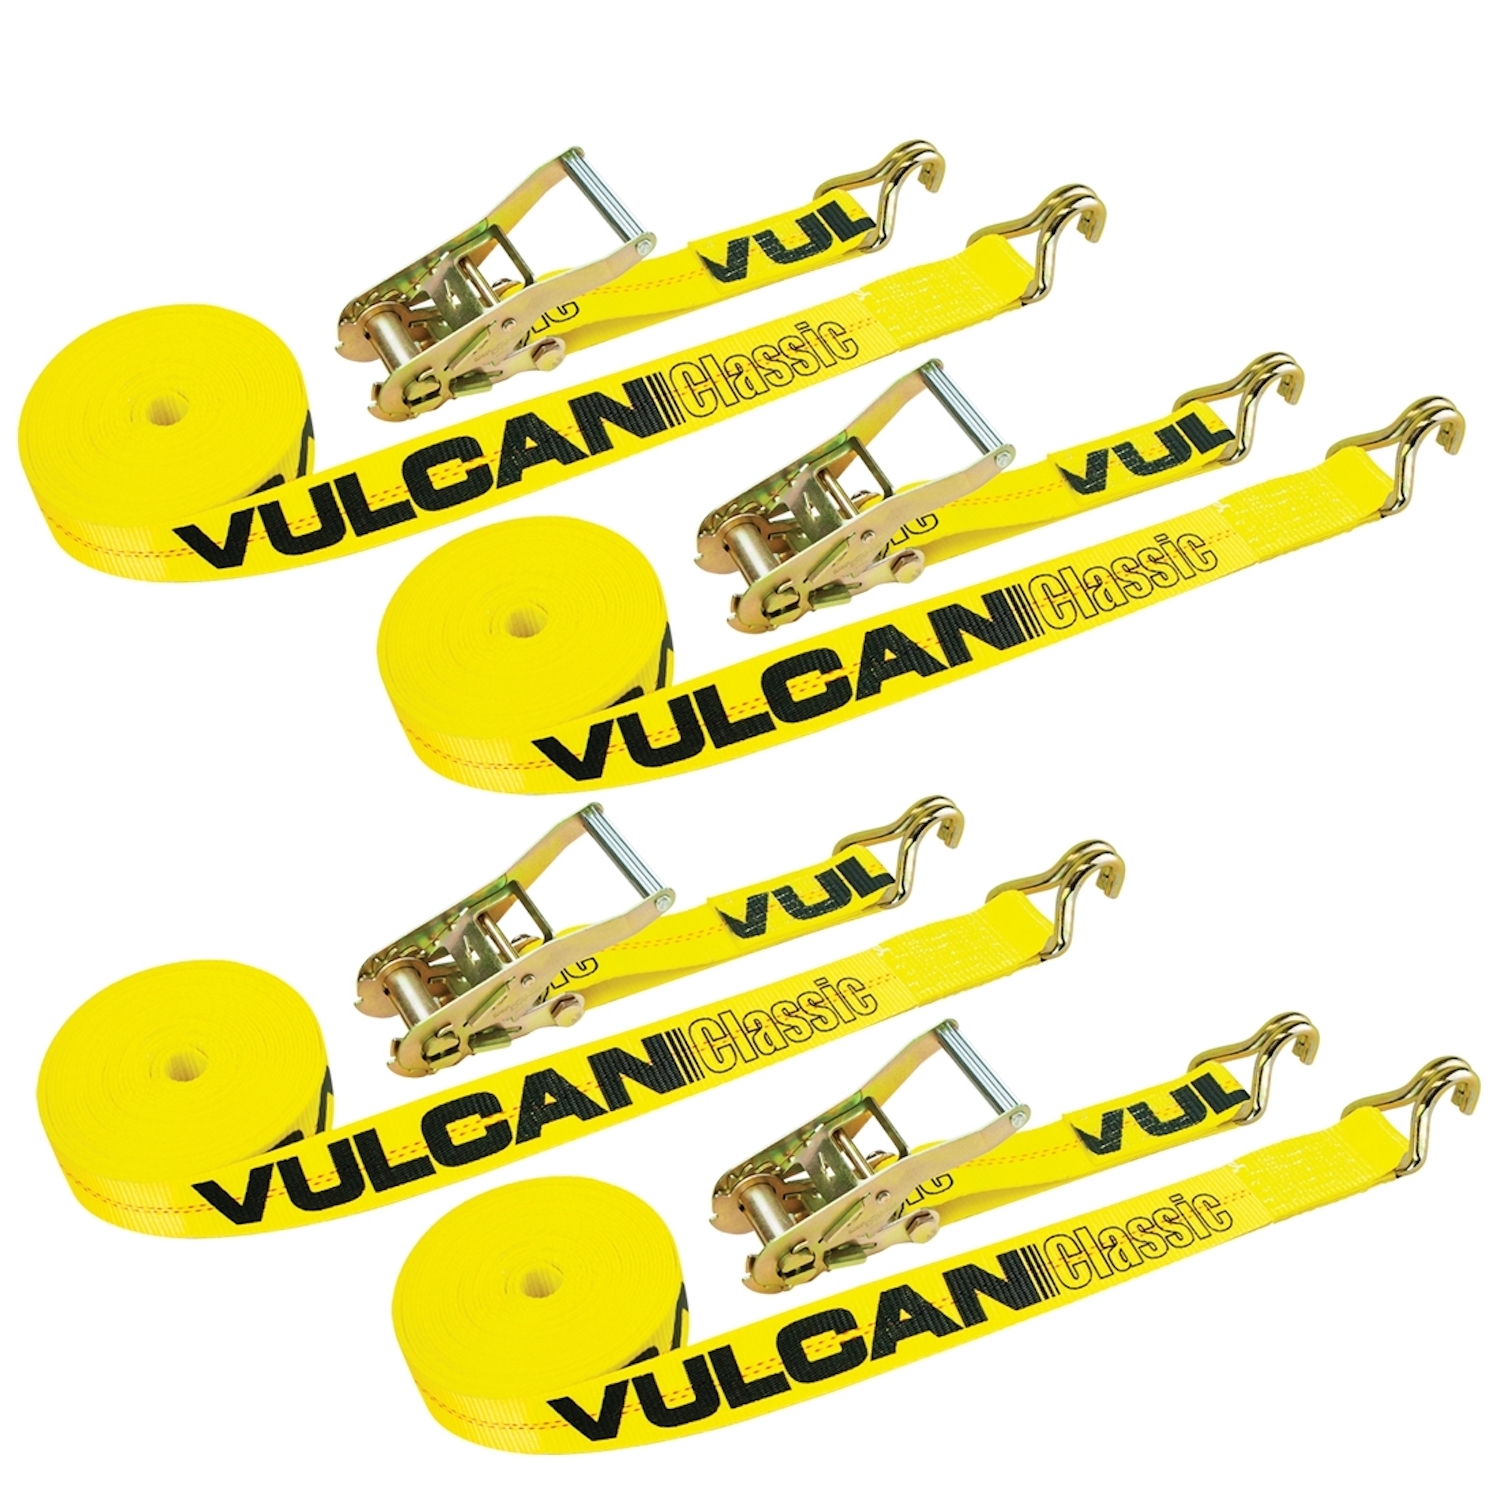 VULCAN Ratchet Straps with Wire J Hooks - 2 Inch x 15 Foot, 4 Pack